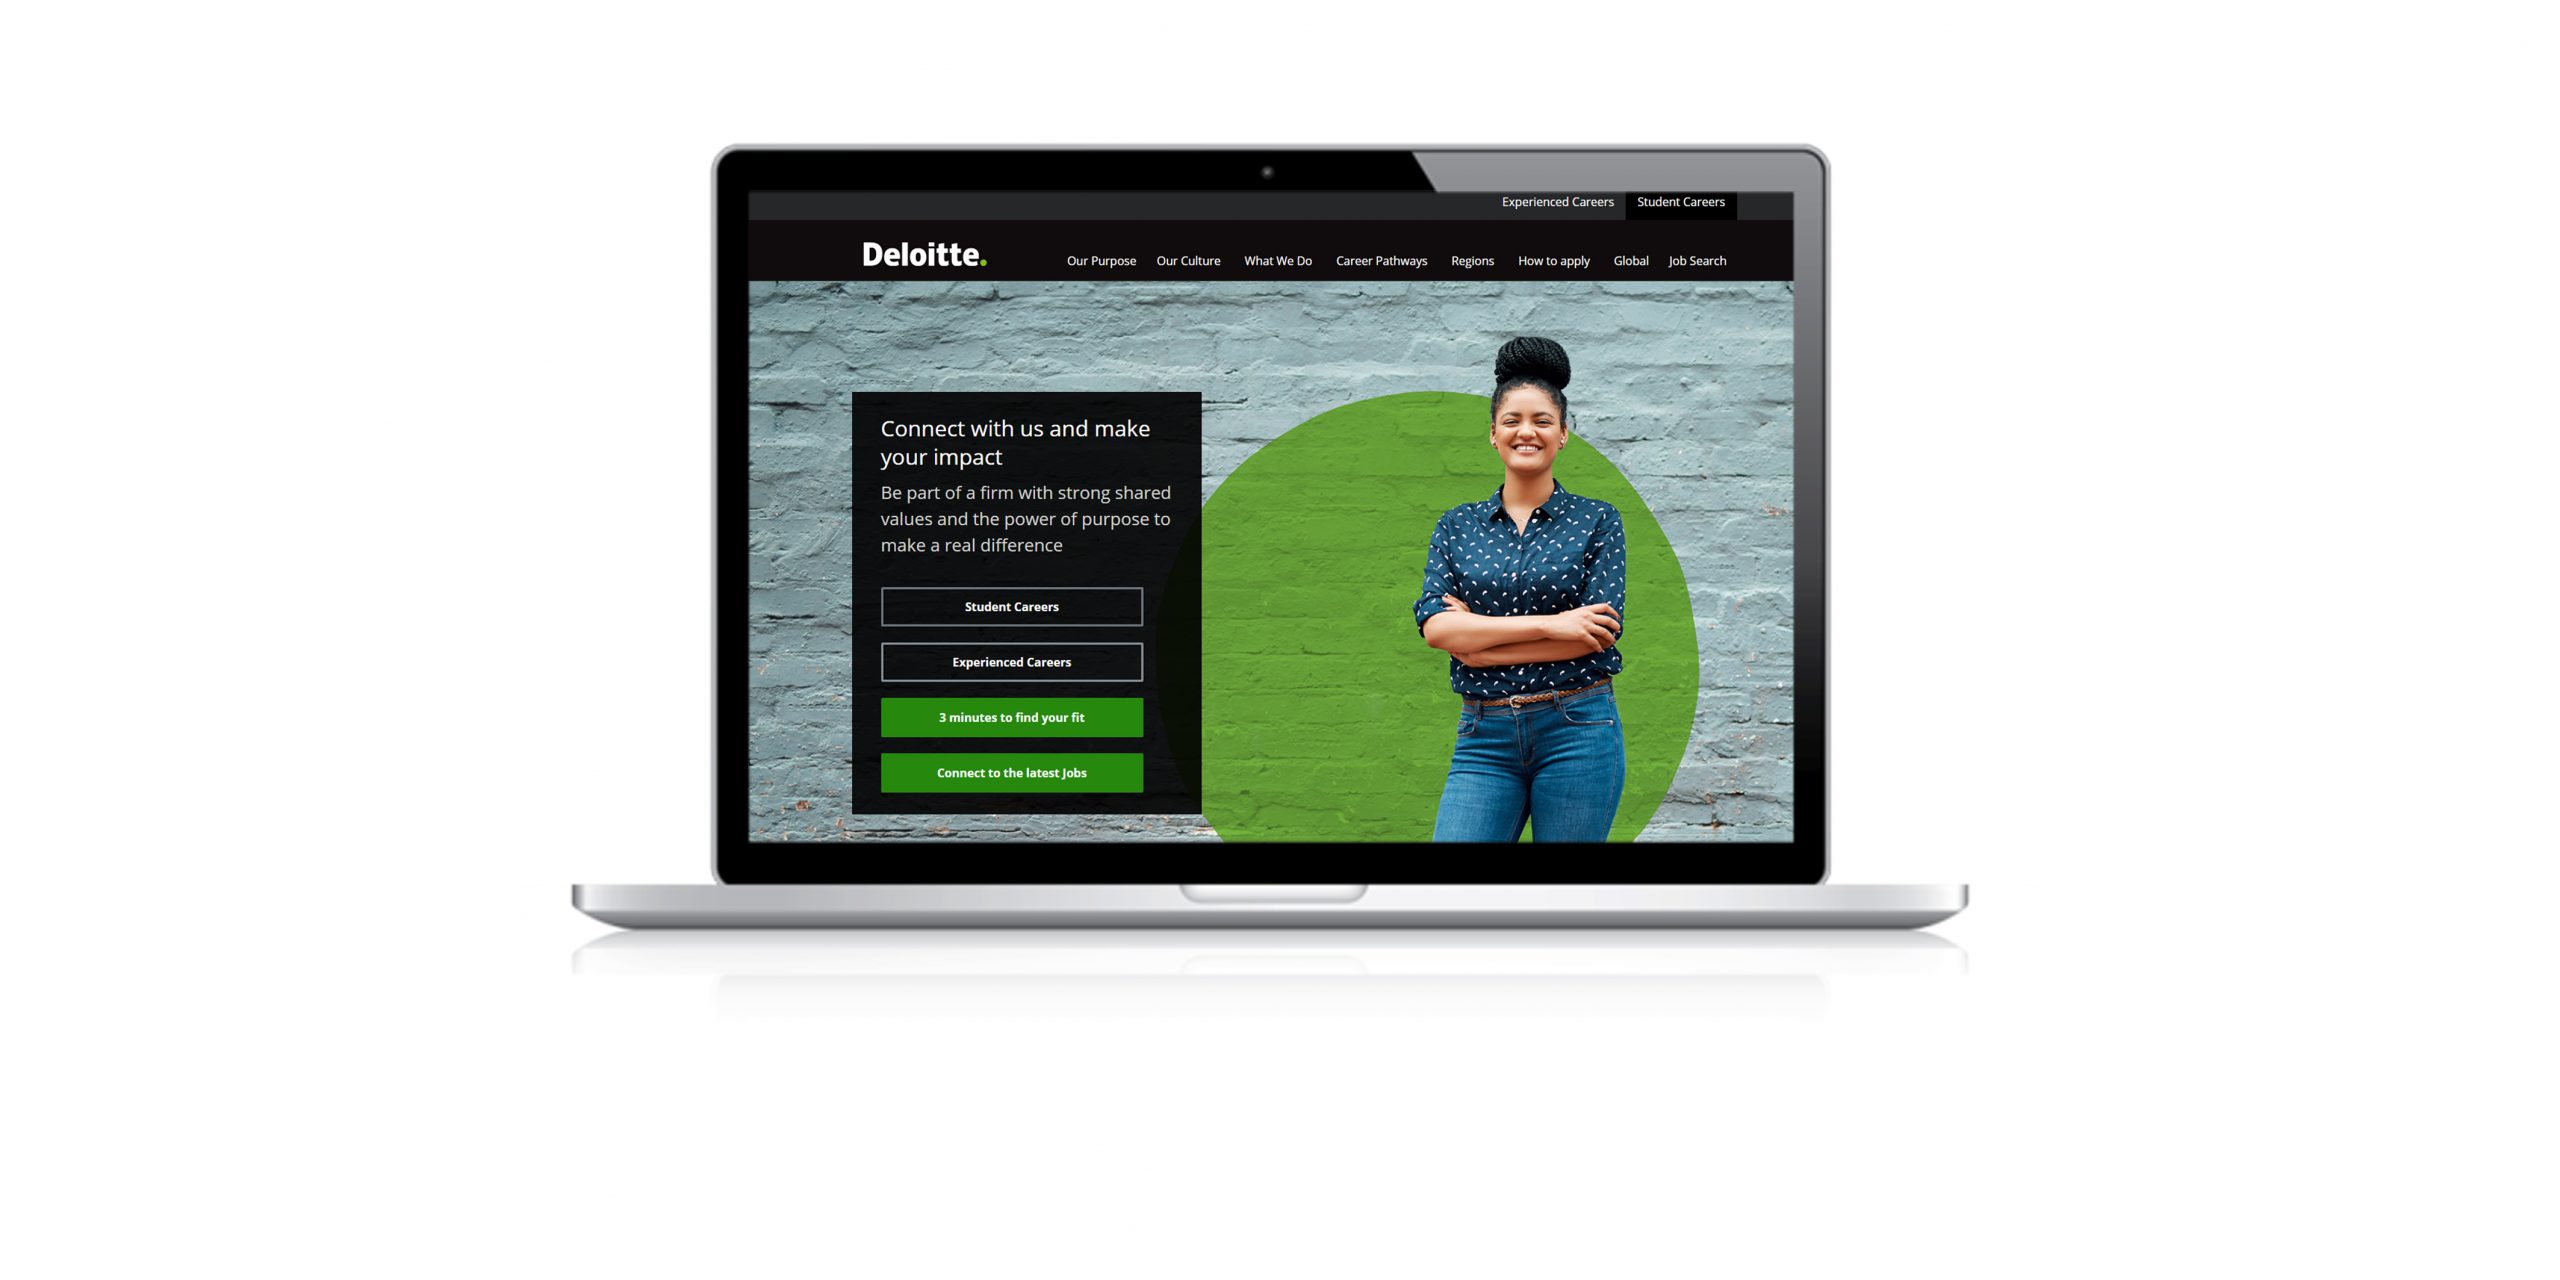 Graduate Recruitment Campaigns: An image of a laptop displaying the Deloitte career website